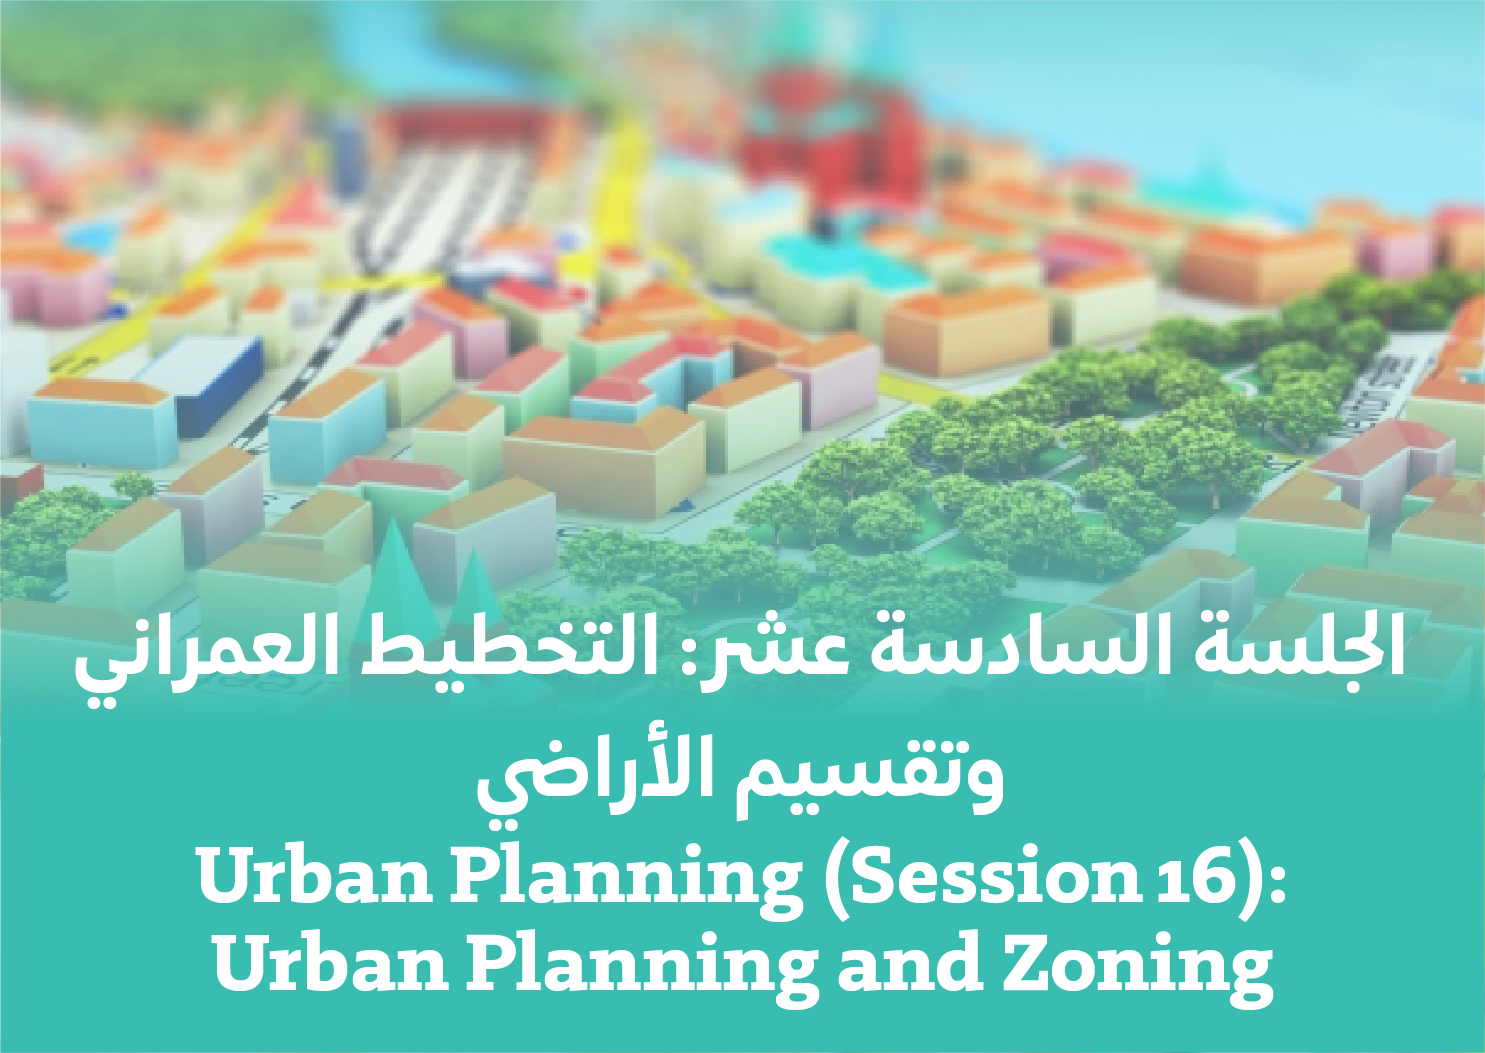 Session 16: Urban Planning and Zoning